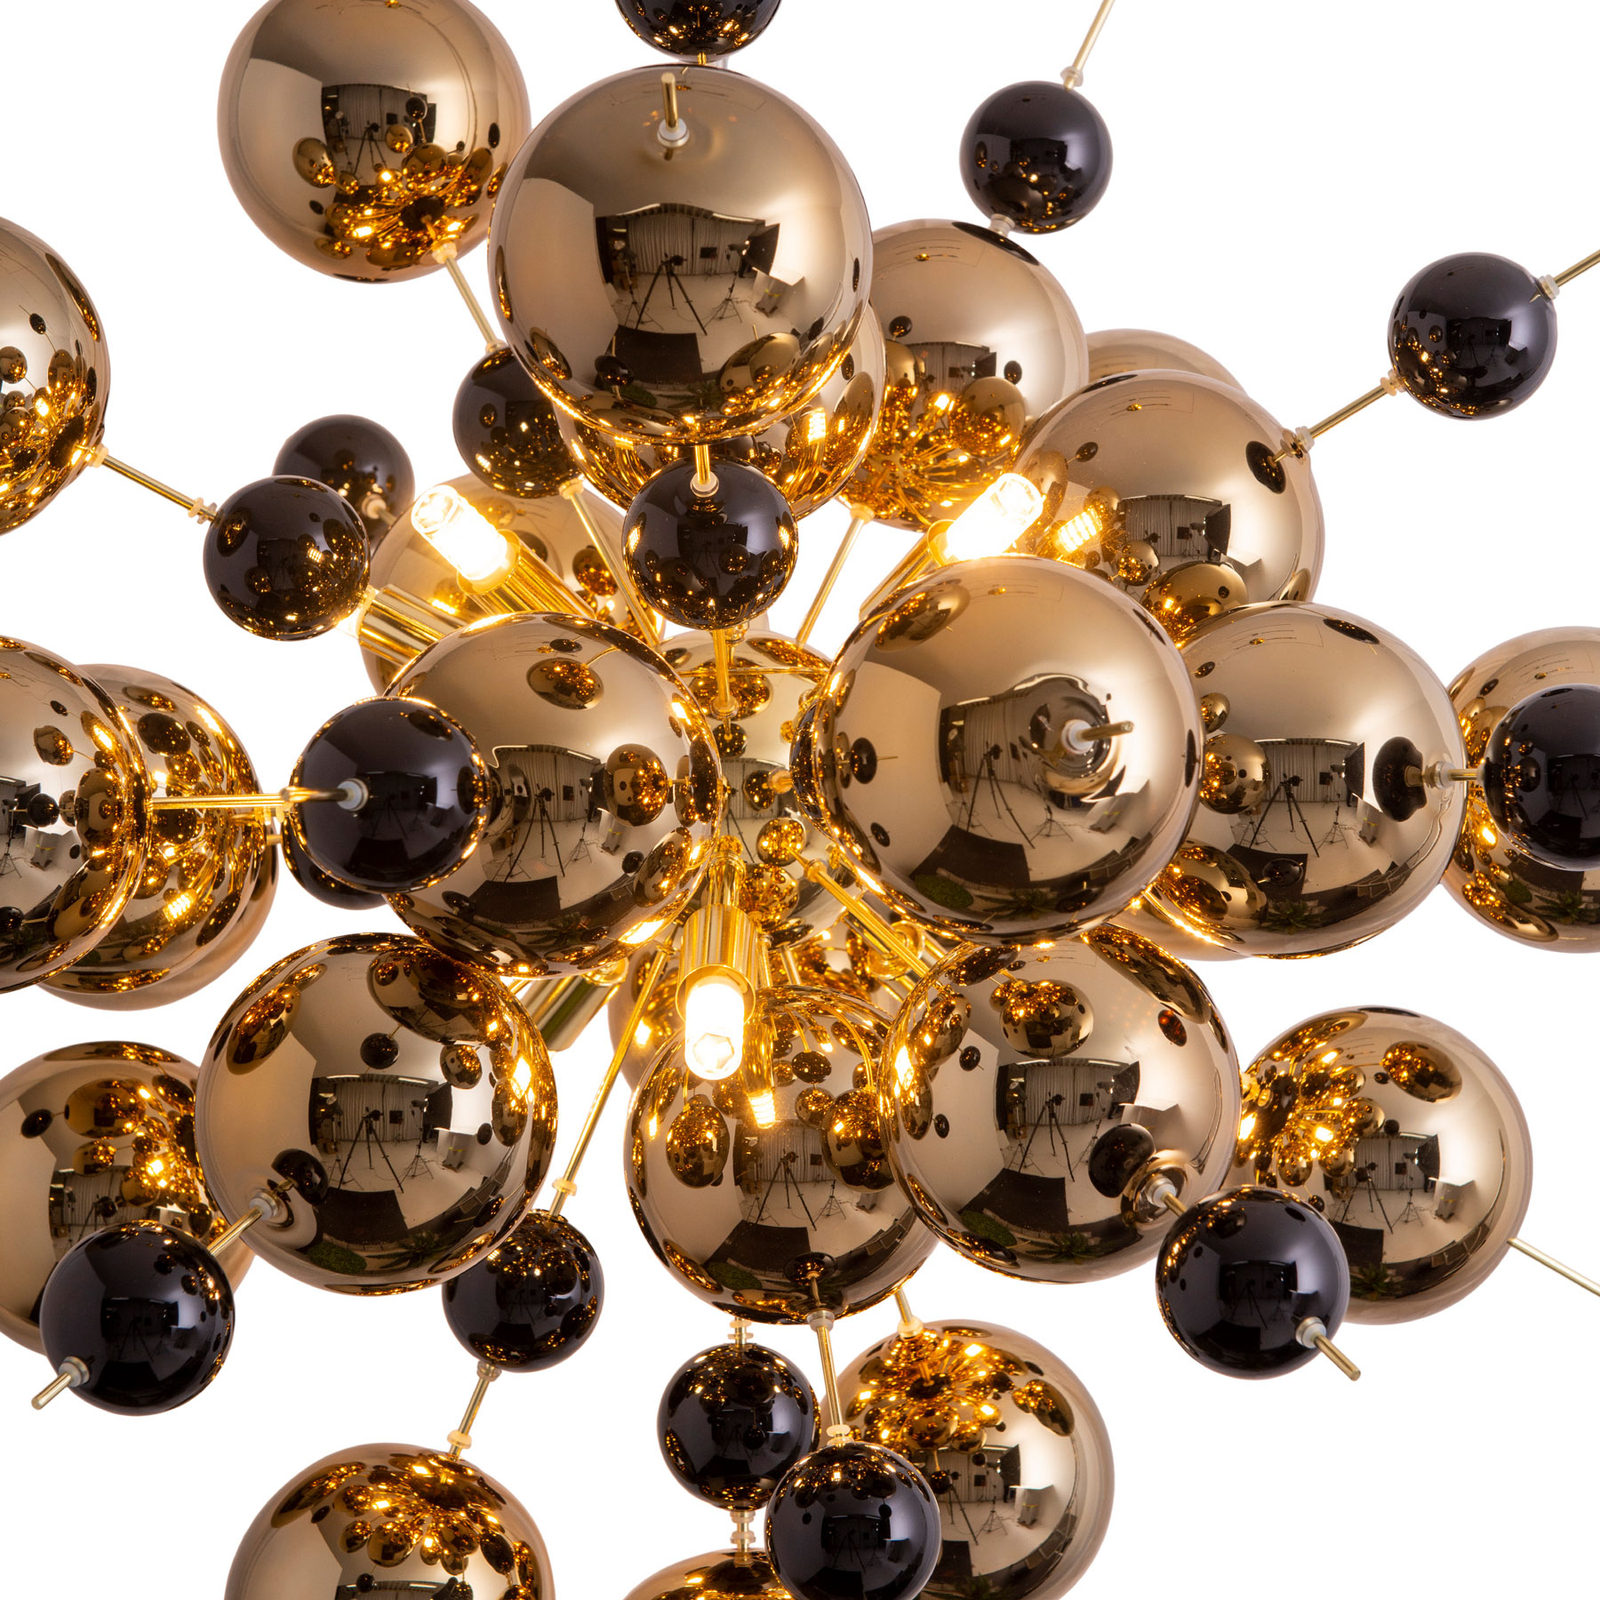 Explosion hanging light with golden globes